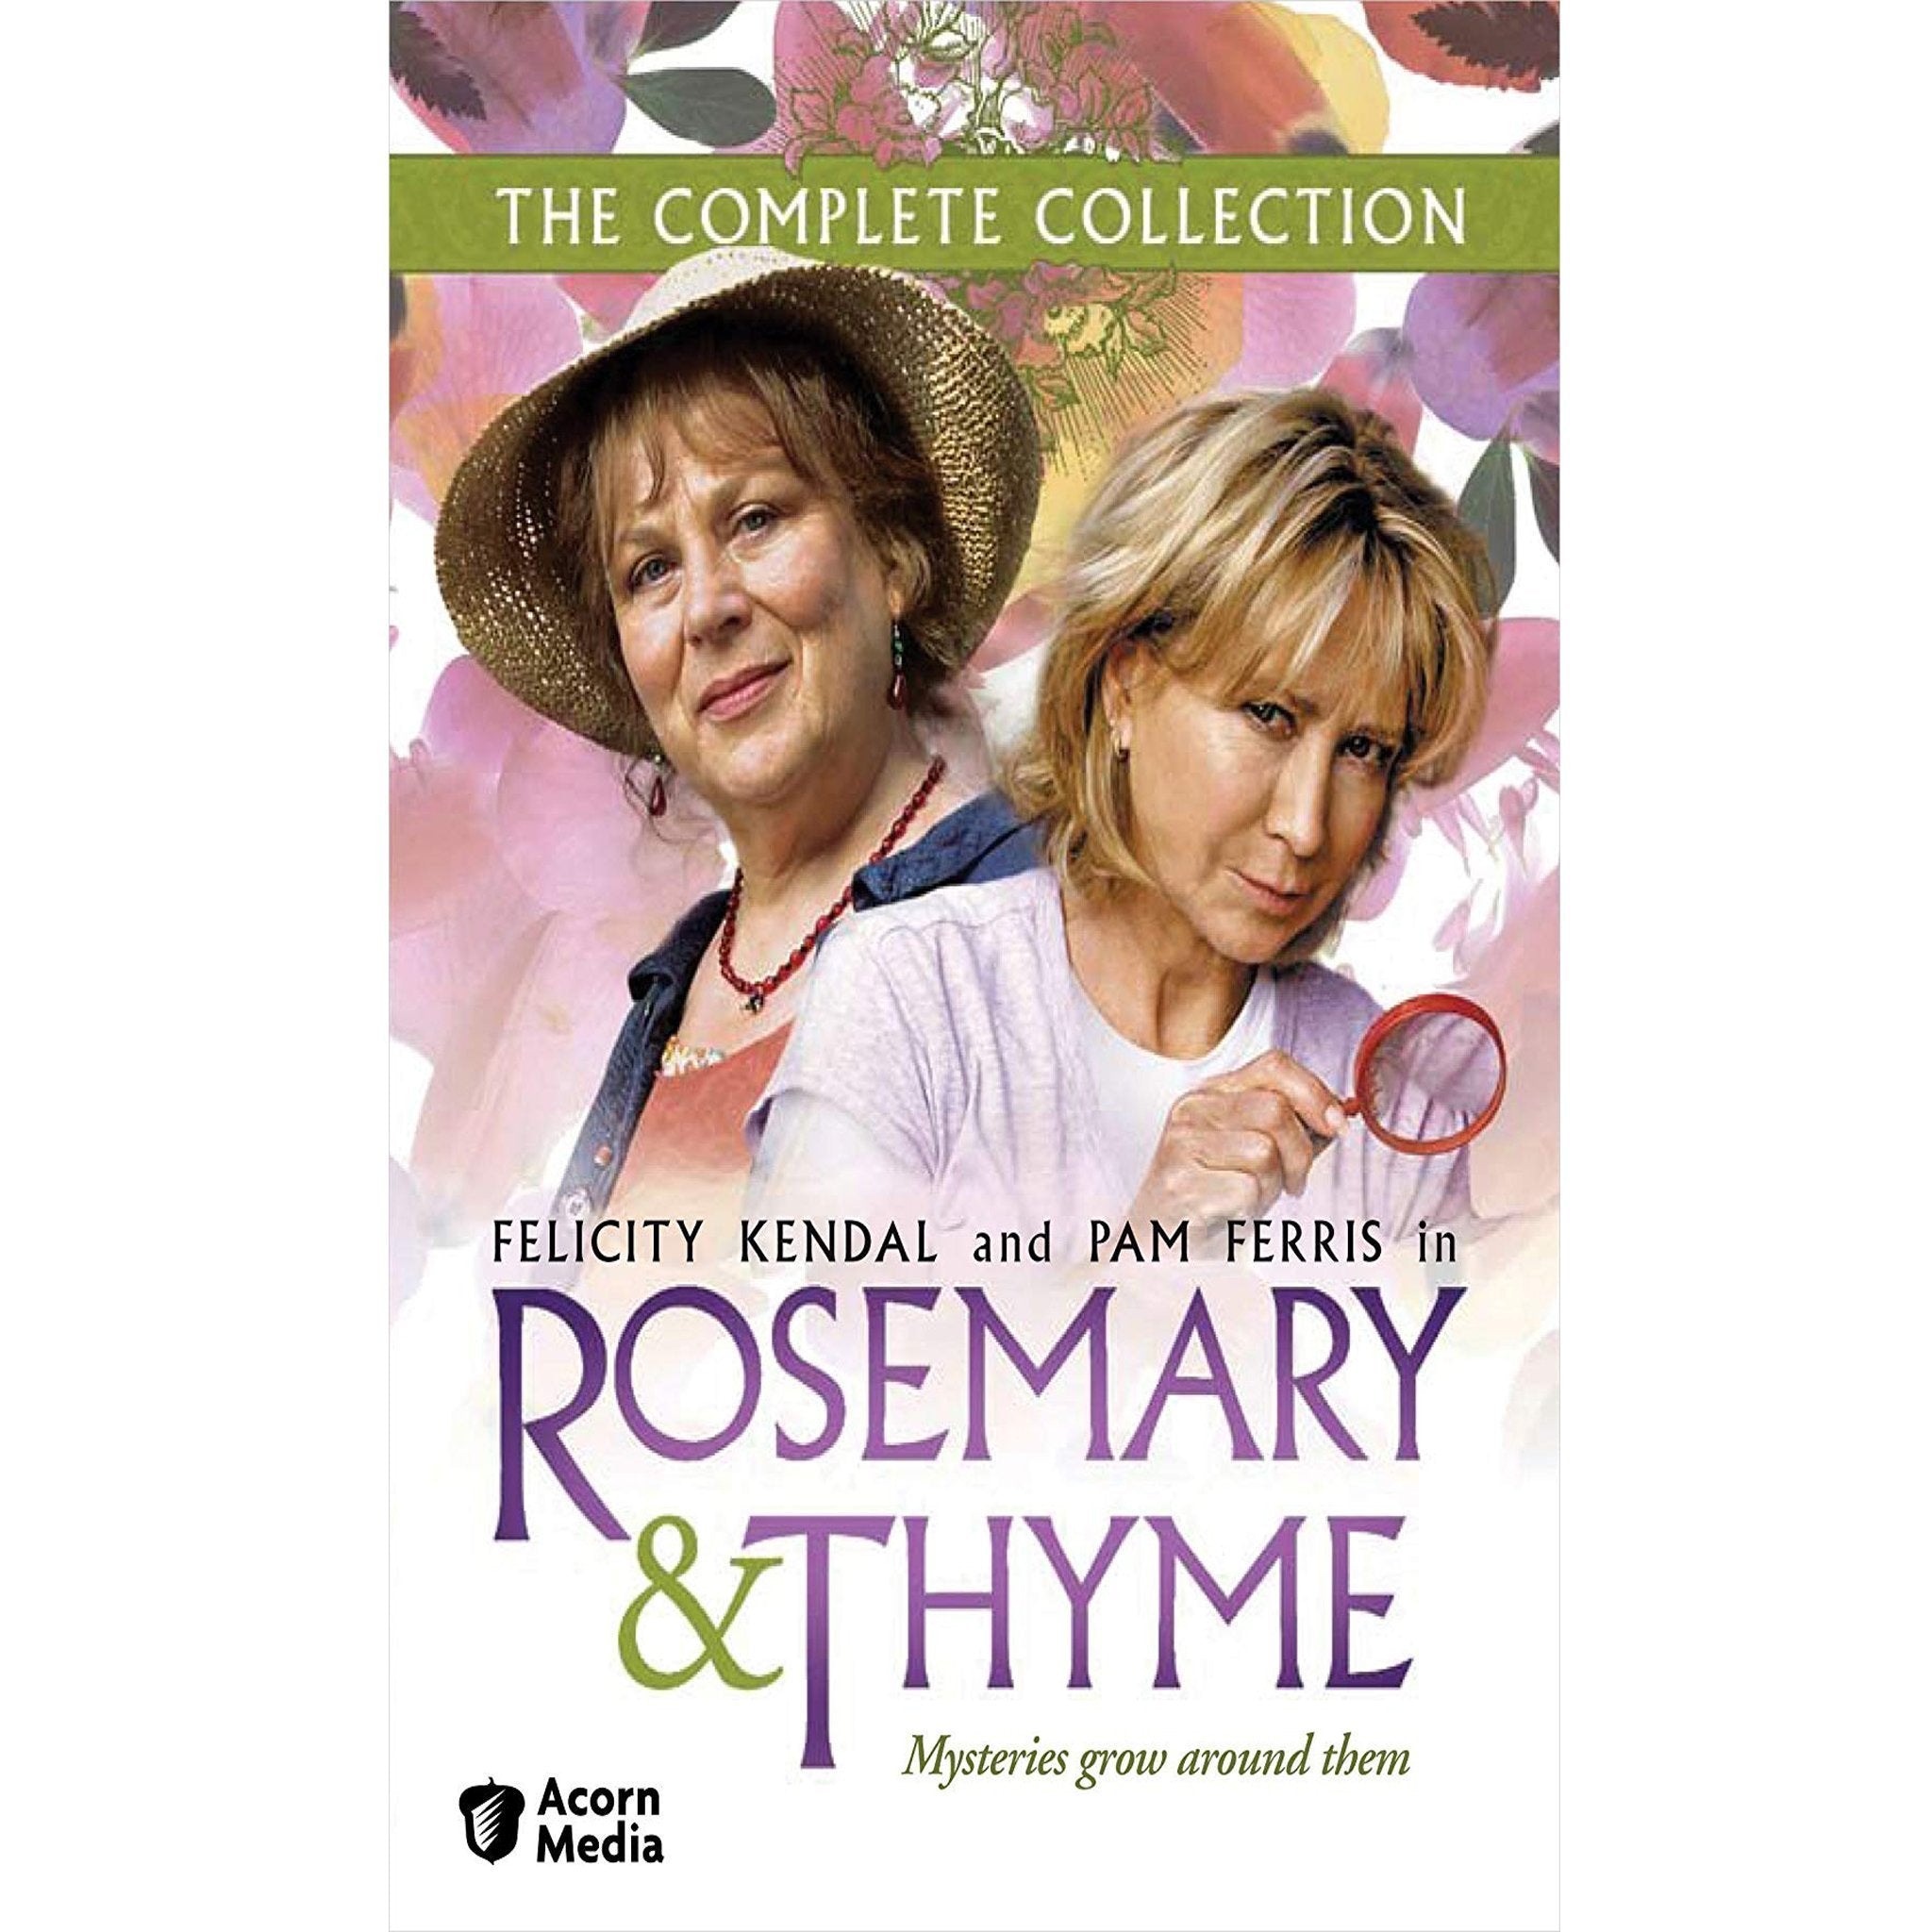 Rosemary and Thyme DVD Complete Series Box Set Acorn Media DVDs & Blu-ray Discs > DVDs > Box Sets